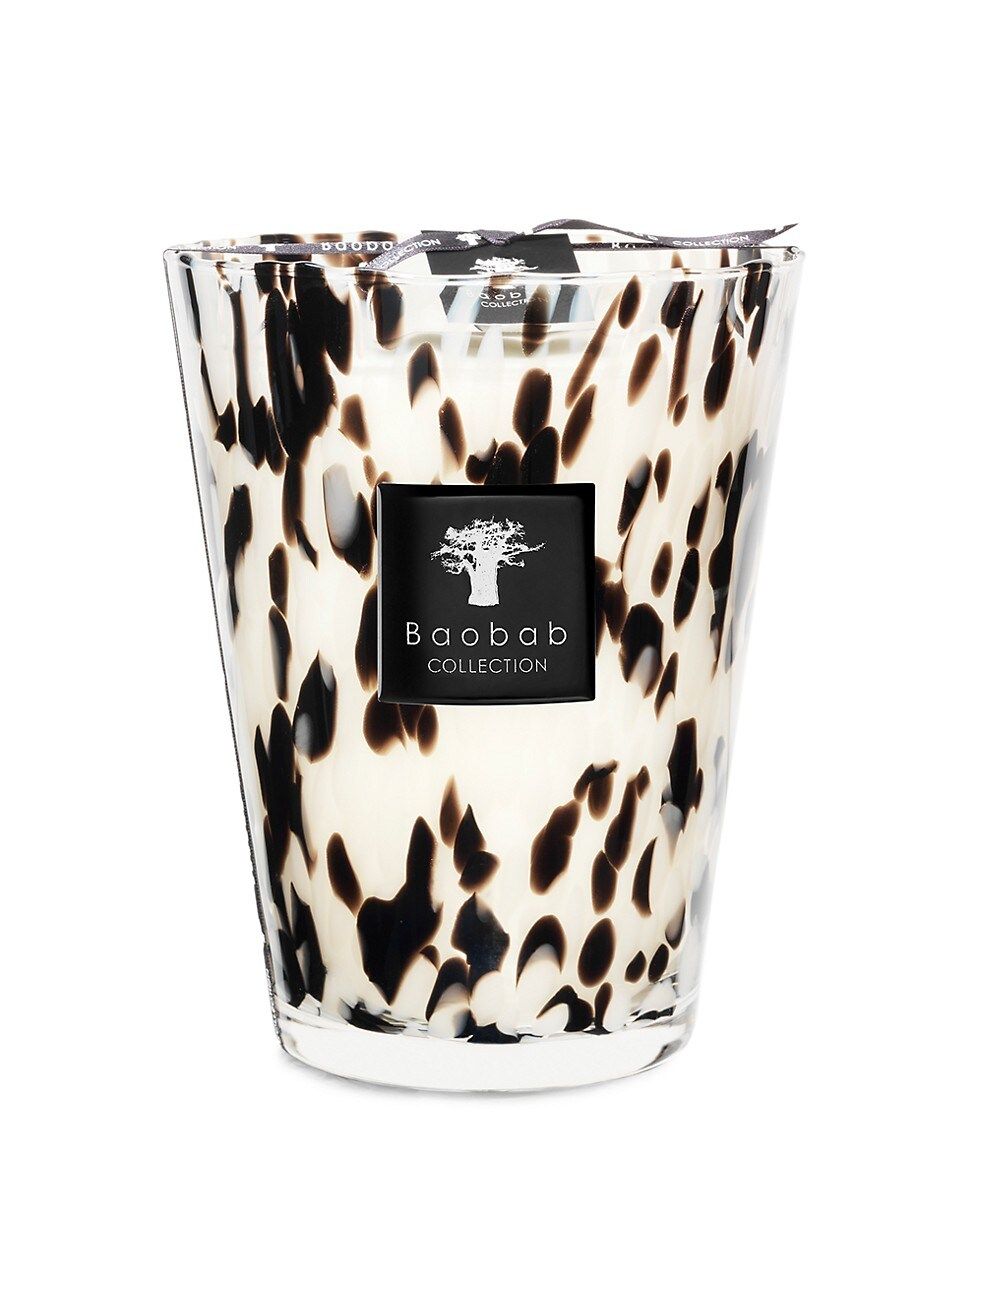 Baobab Collection Pearls Max24 Black Candle | Saks Fifth Avenue